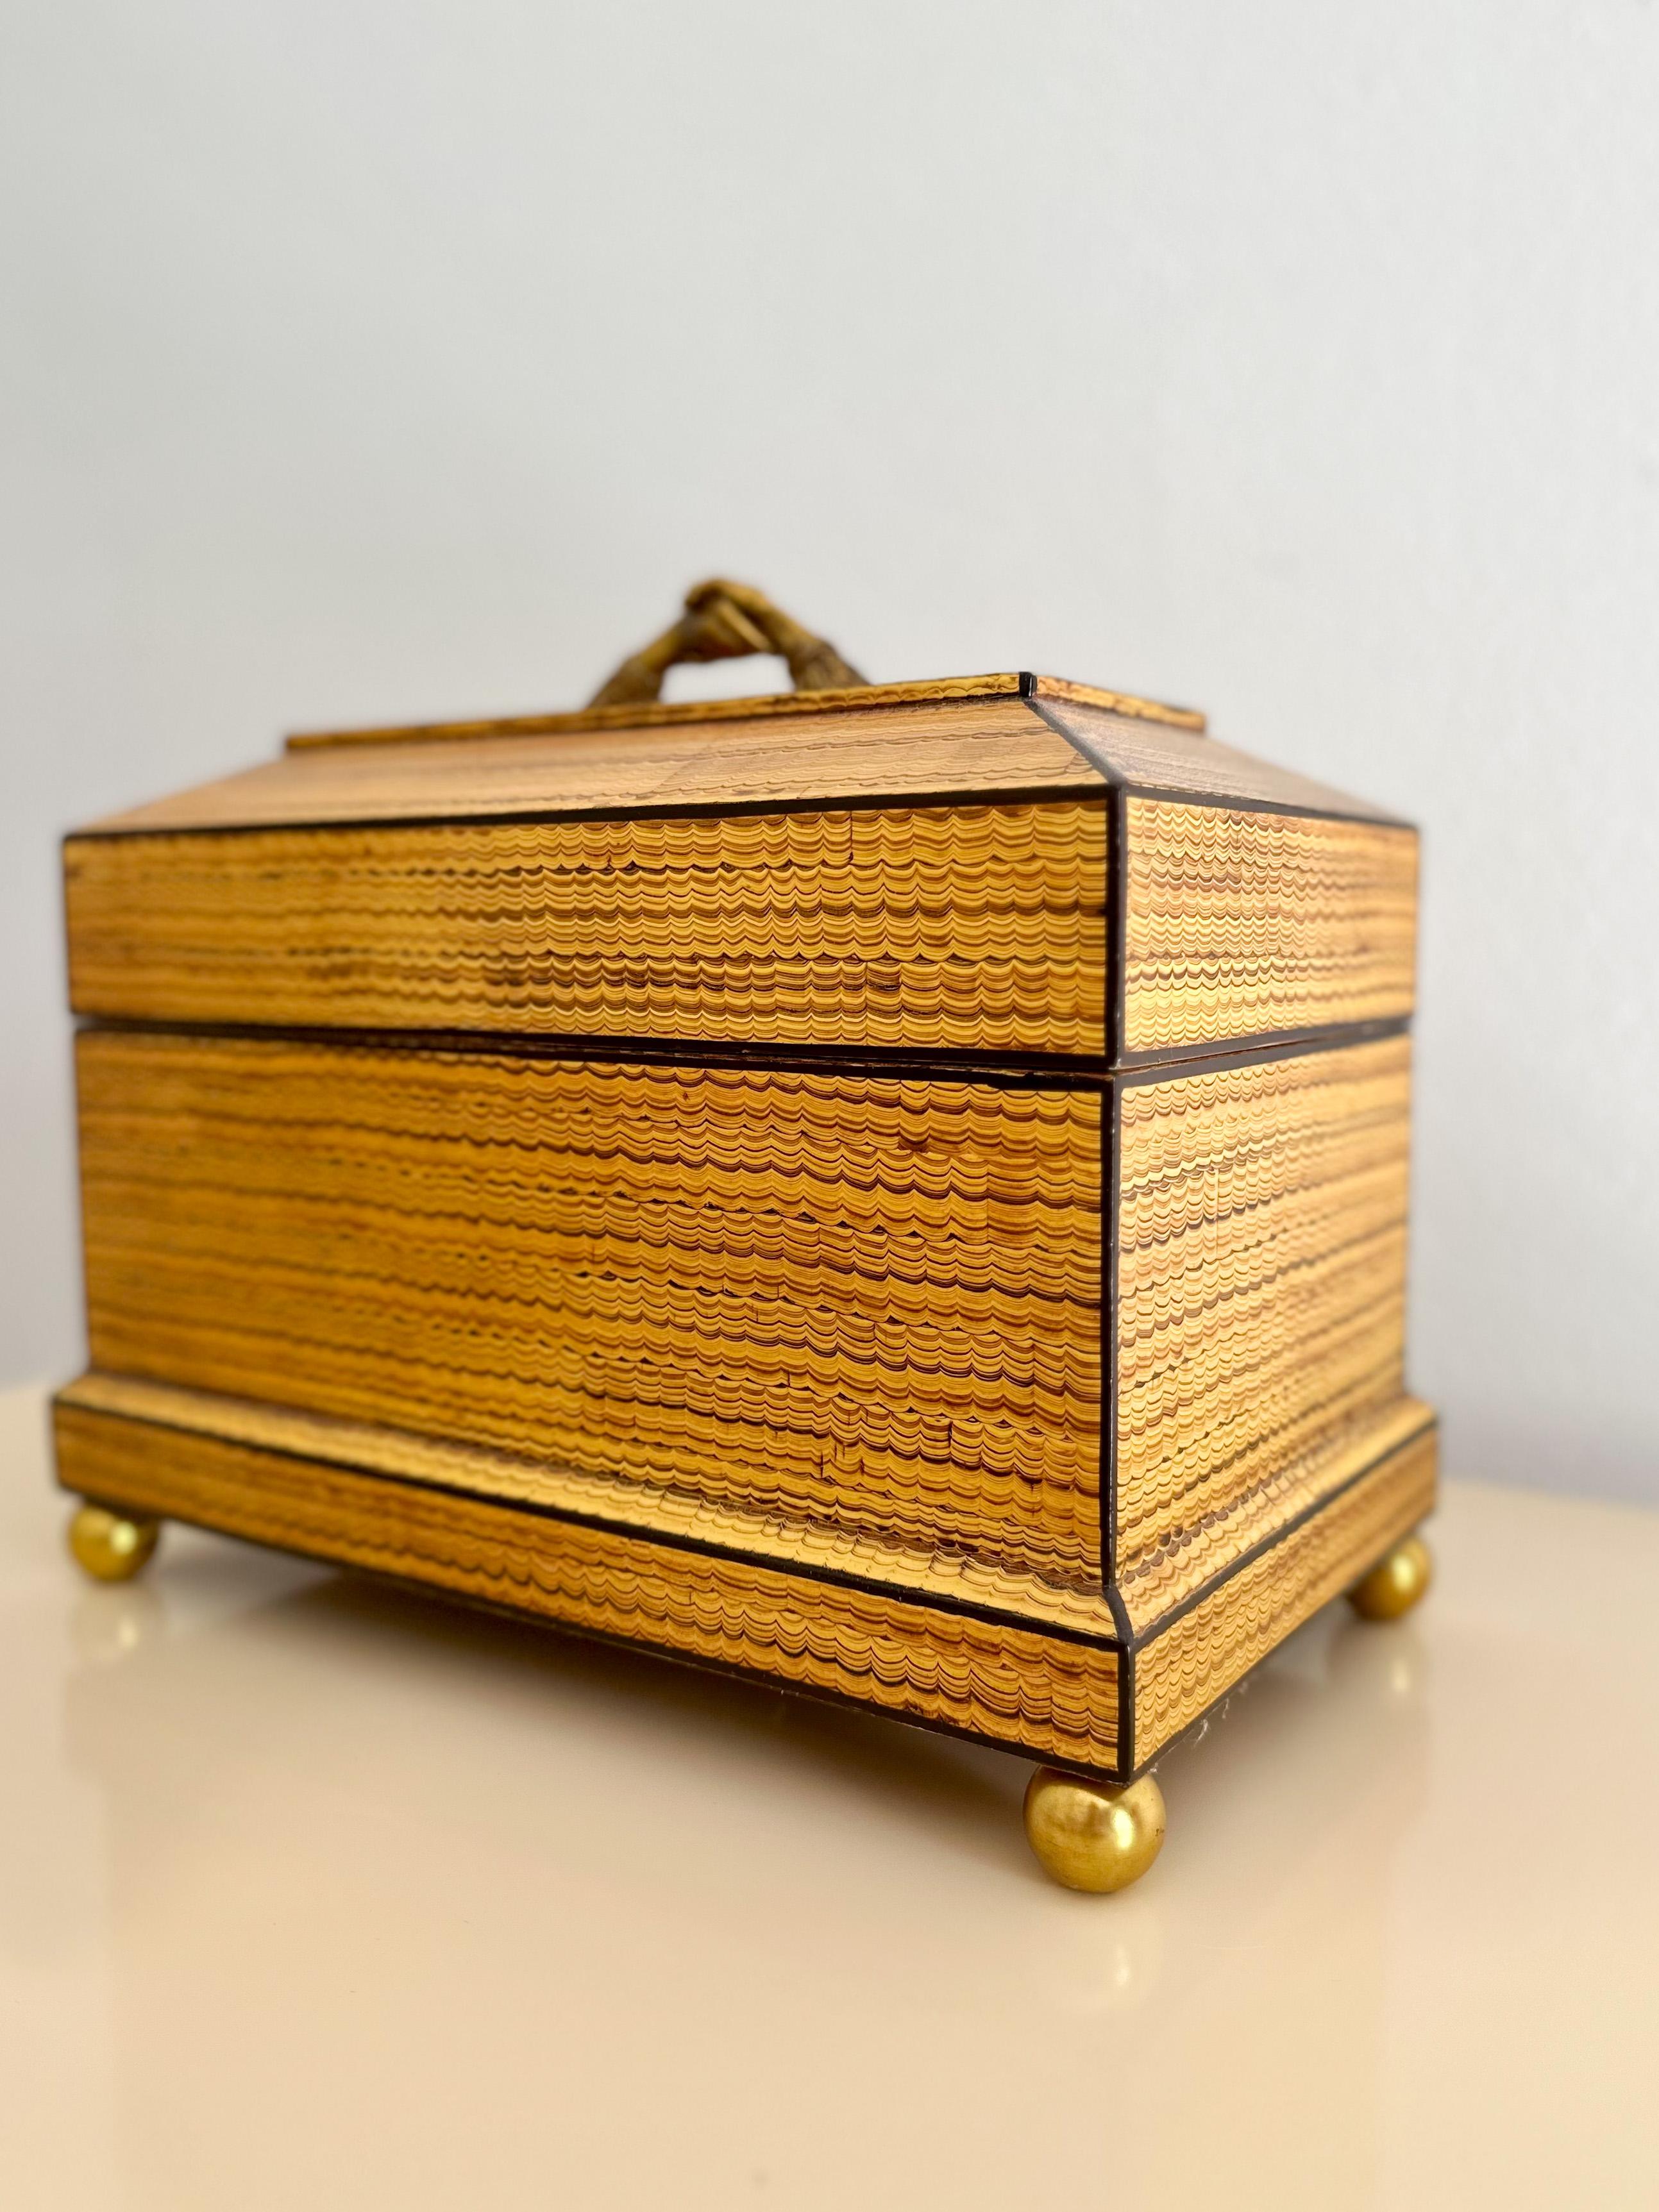 Absolutely gorgeous limited-production Maitland Smith humidor with Spanish cedar lining, humidifier, and hygrometer, hand-crafted in the Philippines. Warm honey-toned combed finish with ebony trim, brass ball feet, and brass handle shaped like two